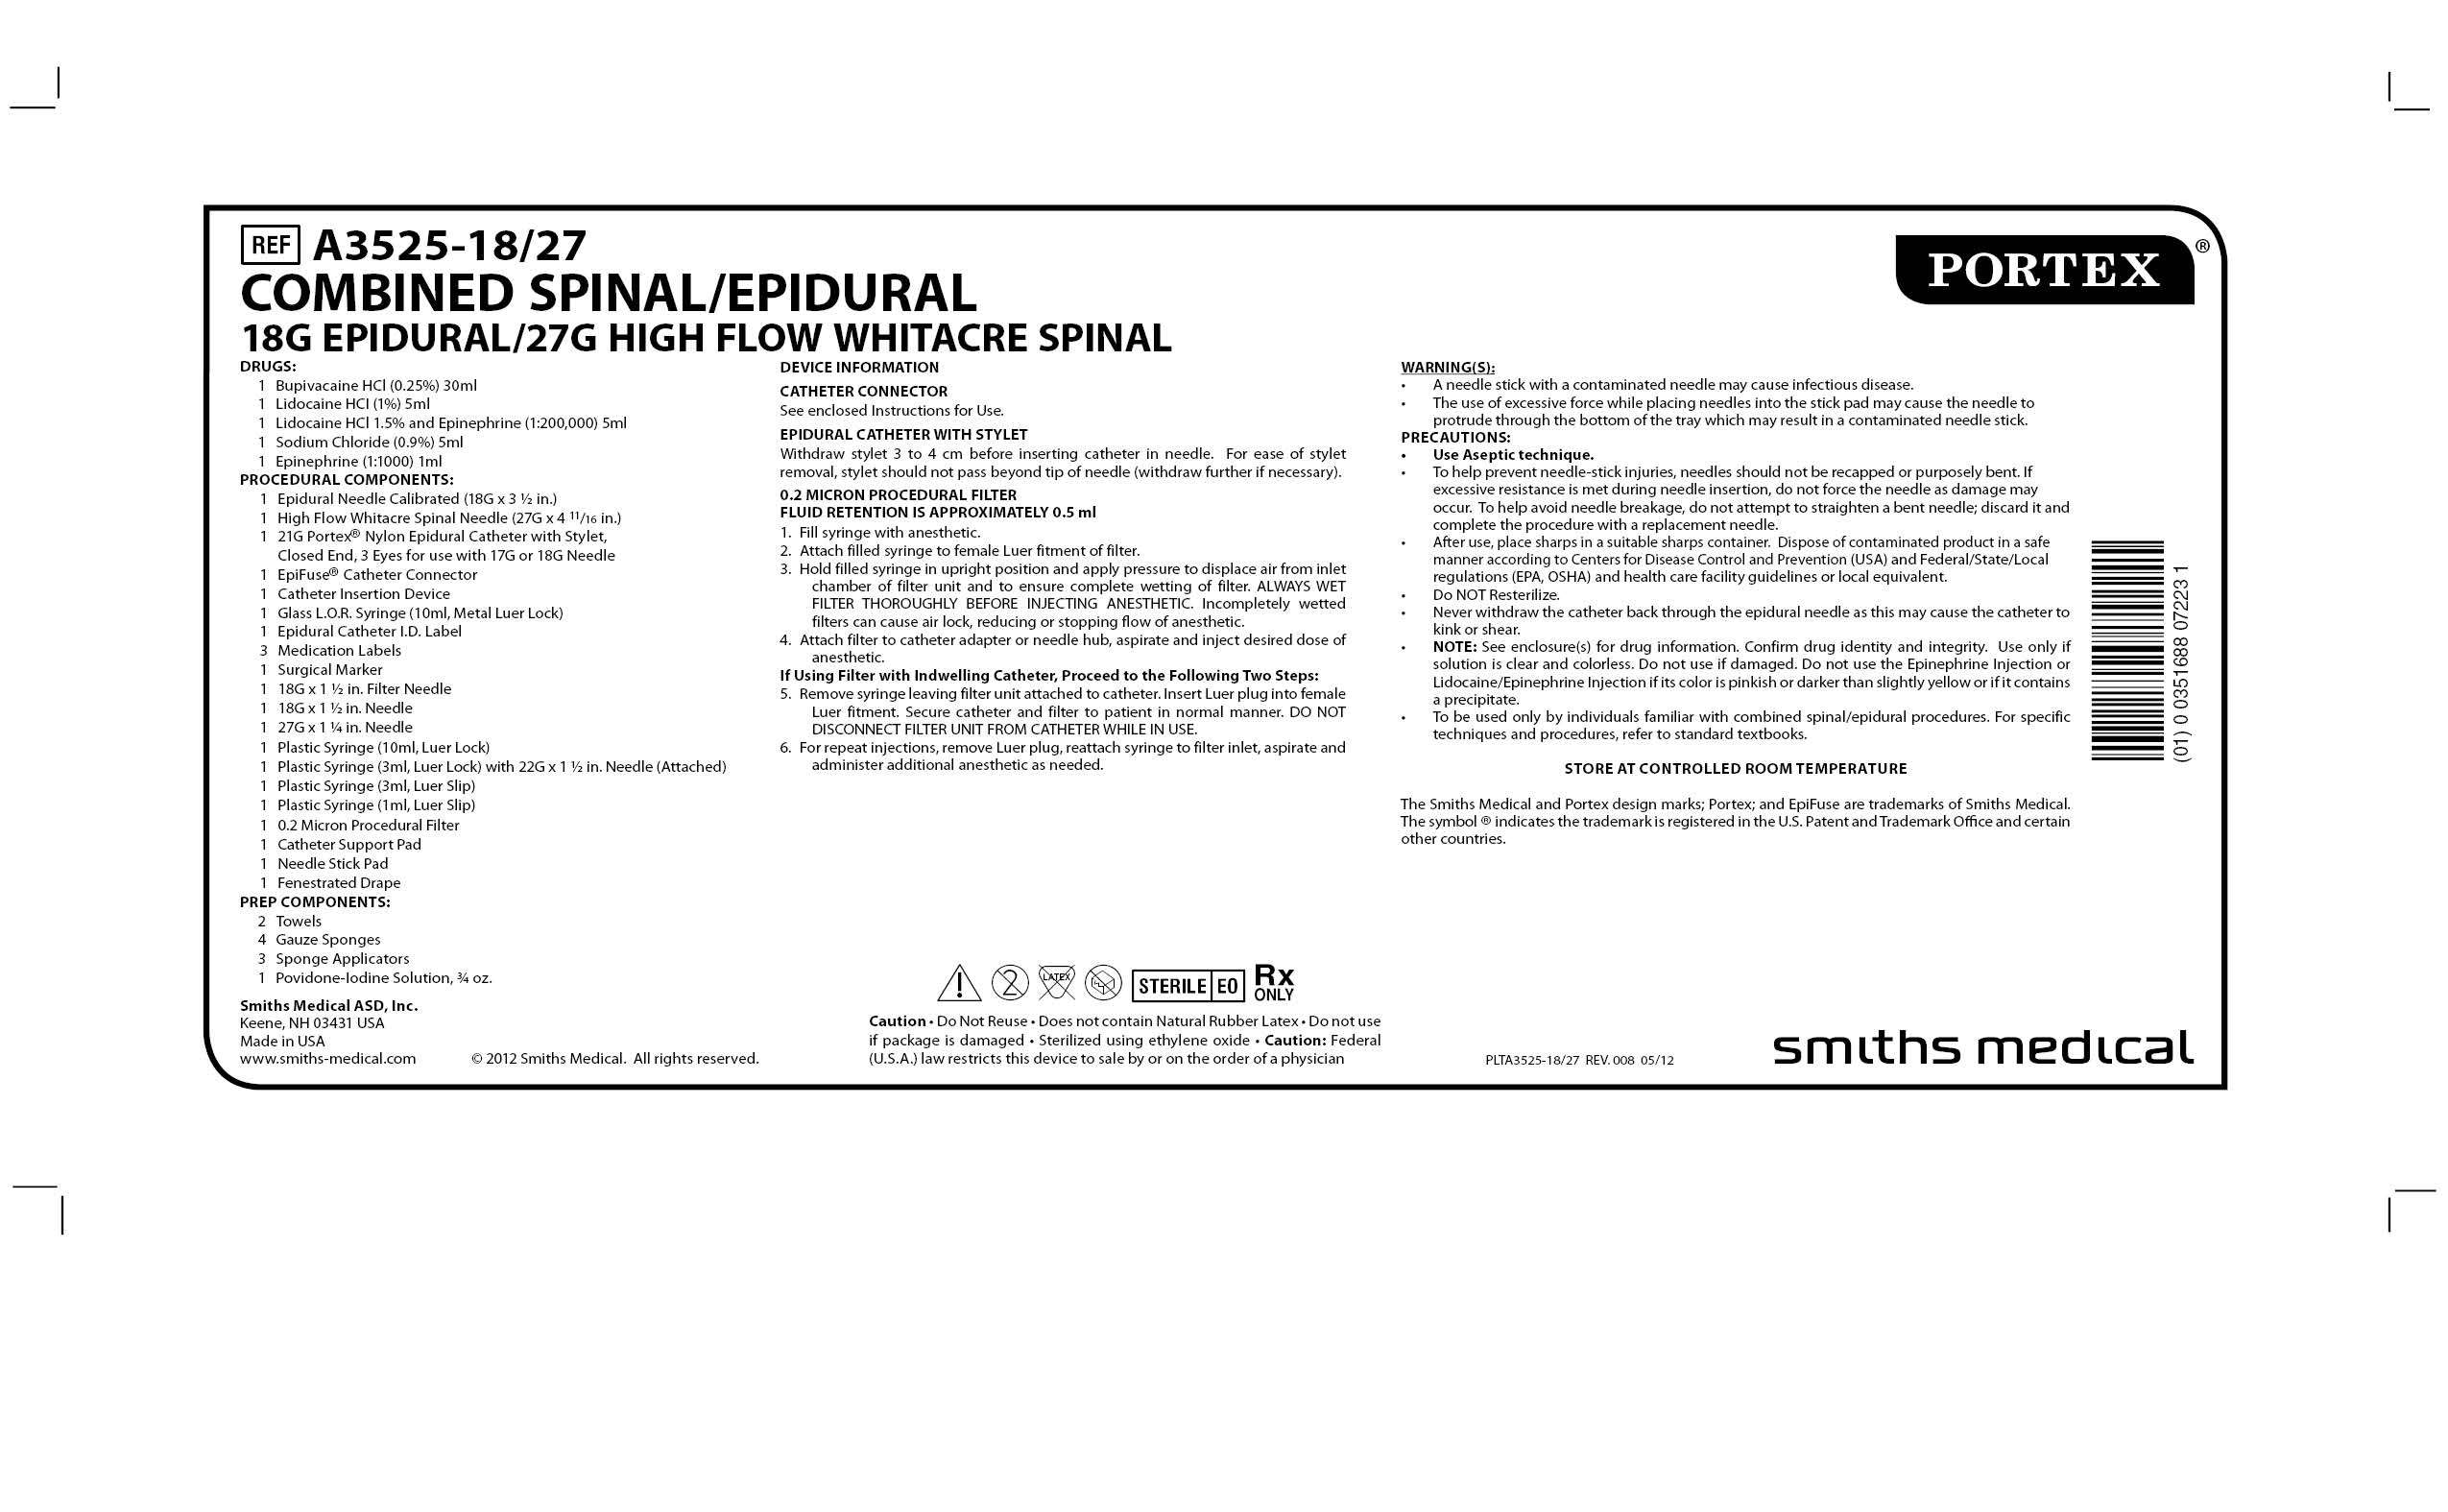 A3525-18/27 COMBINED SPINAL/EPIDURAL 18G EPIDURAL/27G HIGH FLOW WHITACRE SPINAL